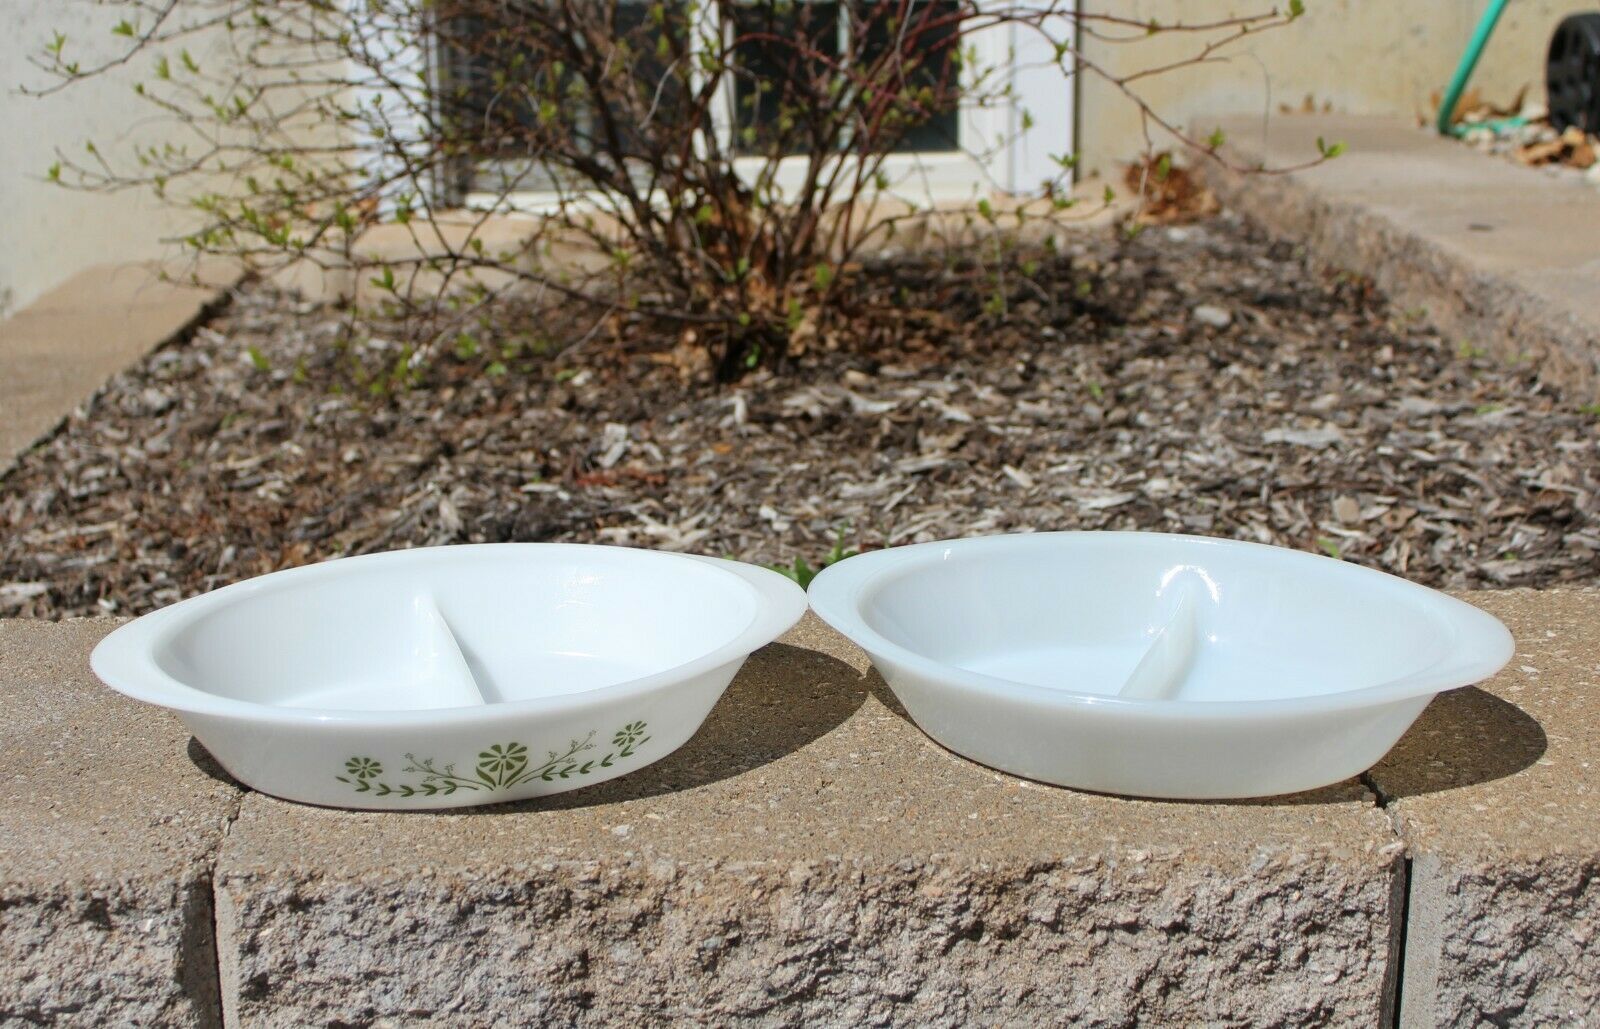 Primary image for Lot of 2 Glasbake Pyrex J2353 divided serving dishes - Green Daisy & White